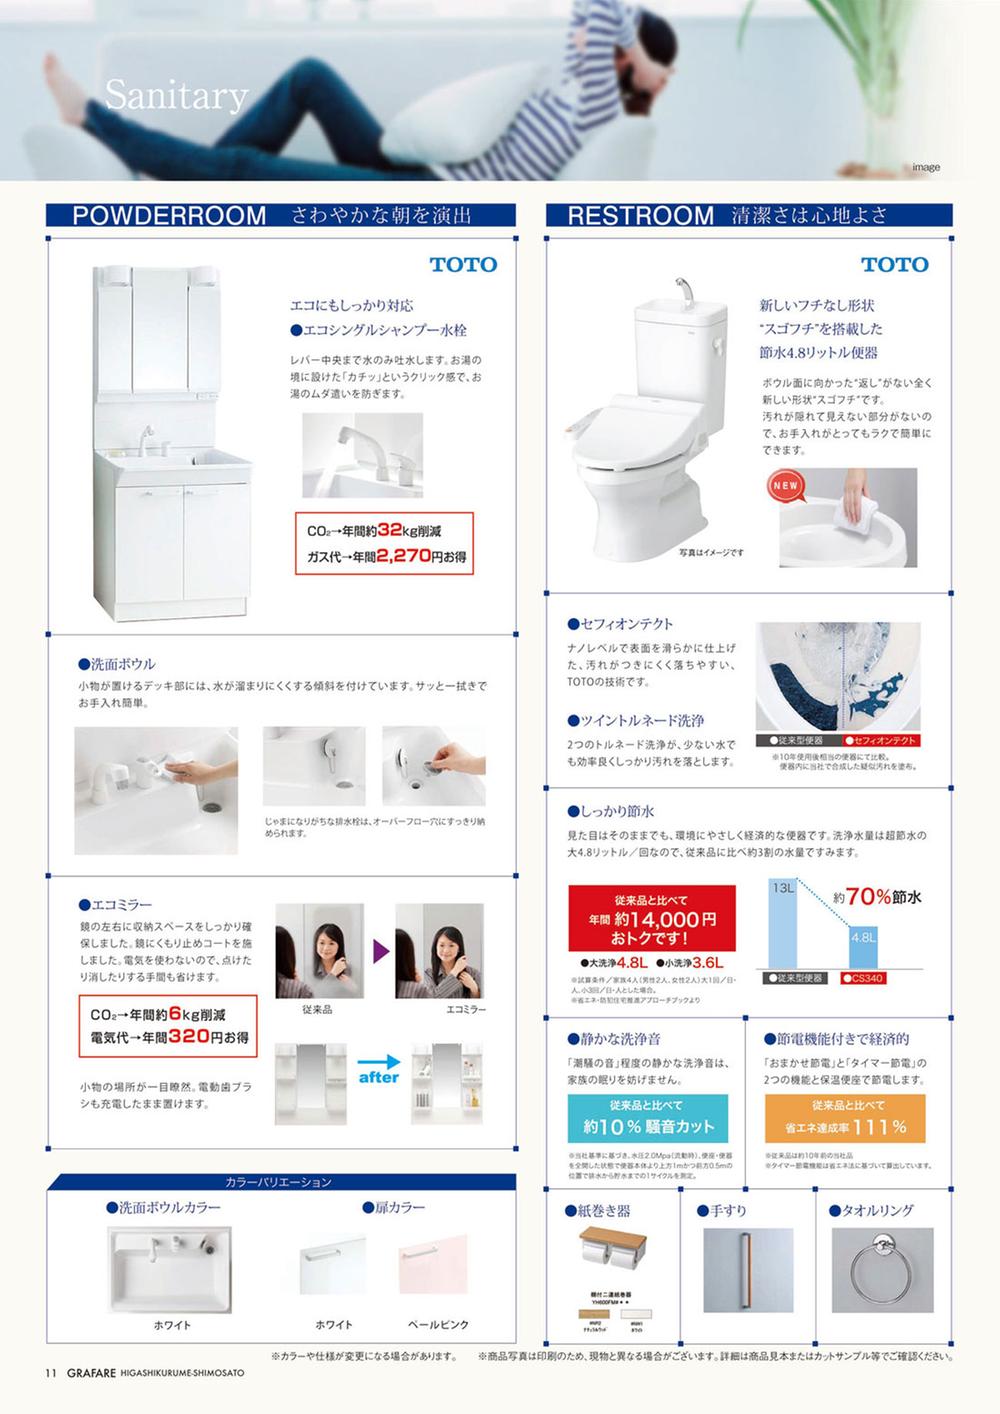 Power generation ・ Hot water equipment. In toilet borderless shape, Wash basin cleaning is also easy three-sided mirror ・ Eco single shampoo faucet adopted